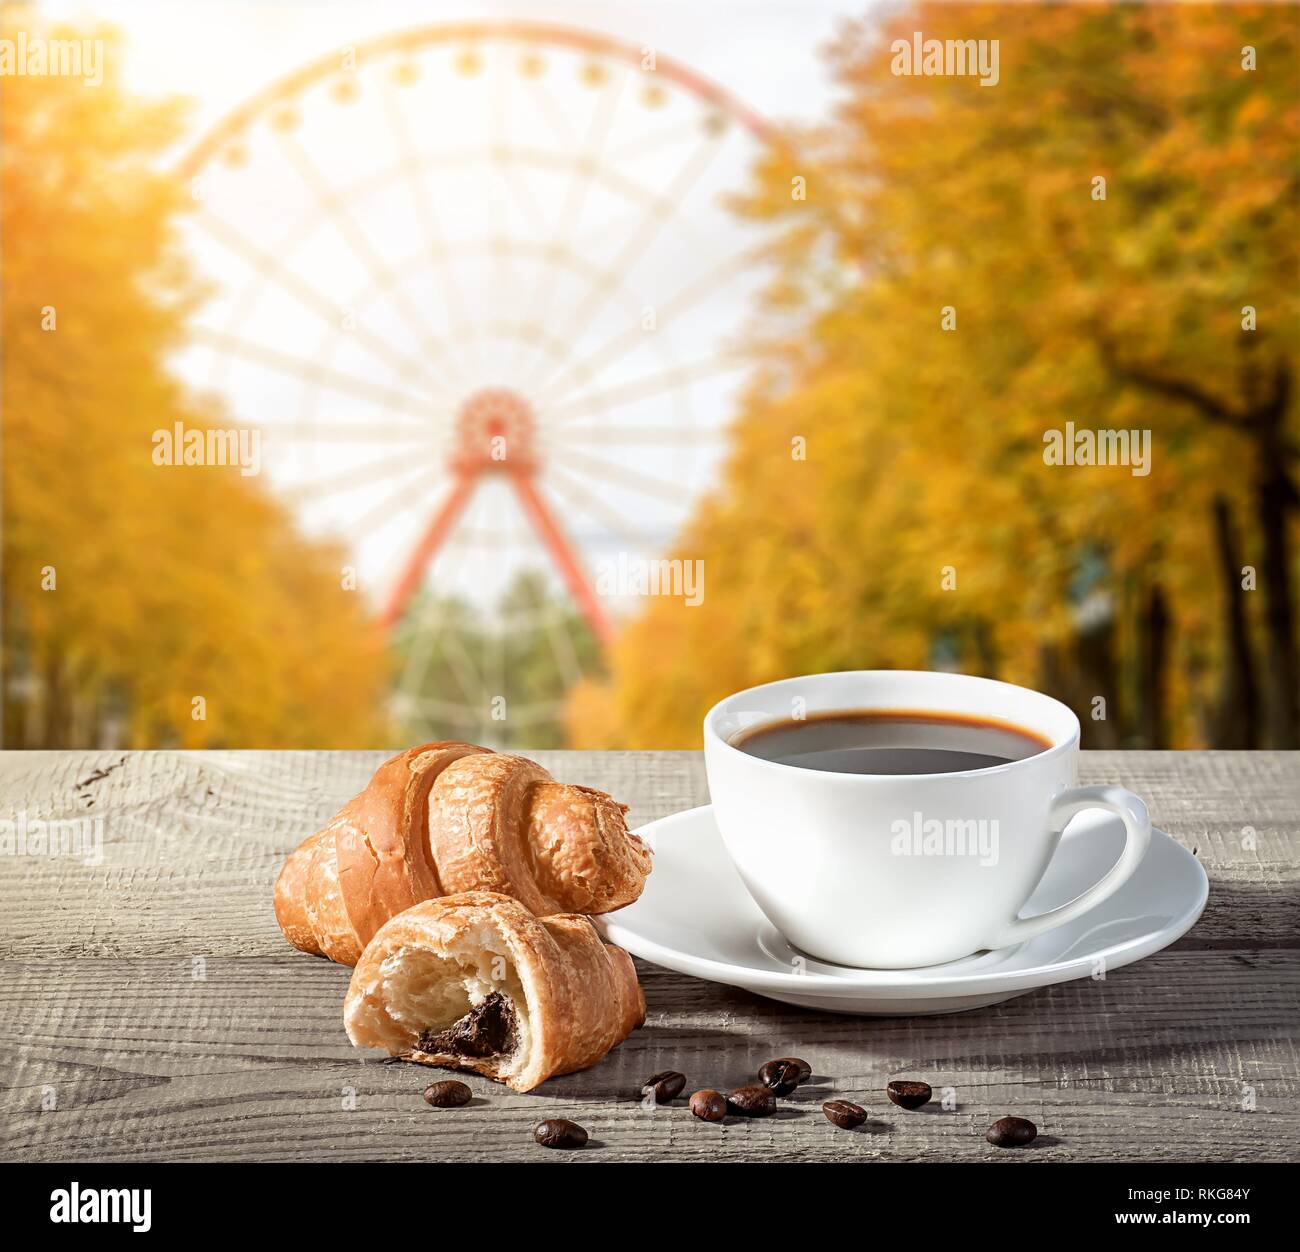 A cup of coffee with croissants on a wooden table. Grains of coffee on the table. Blurred background of a ferris wheel in autumn in the park. Stock Photo